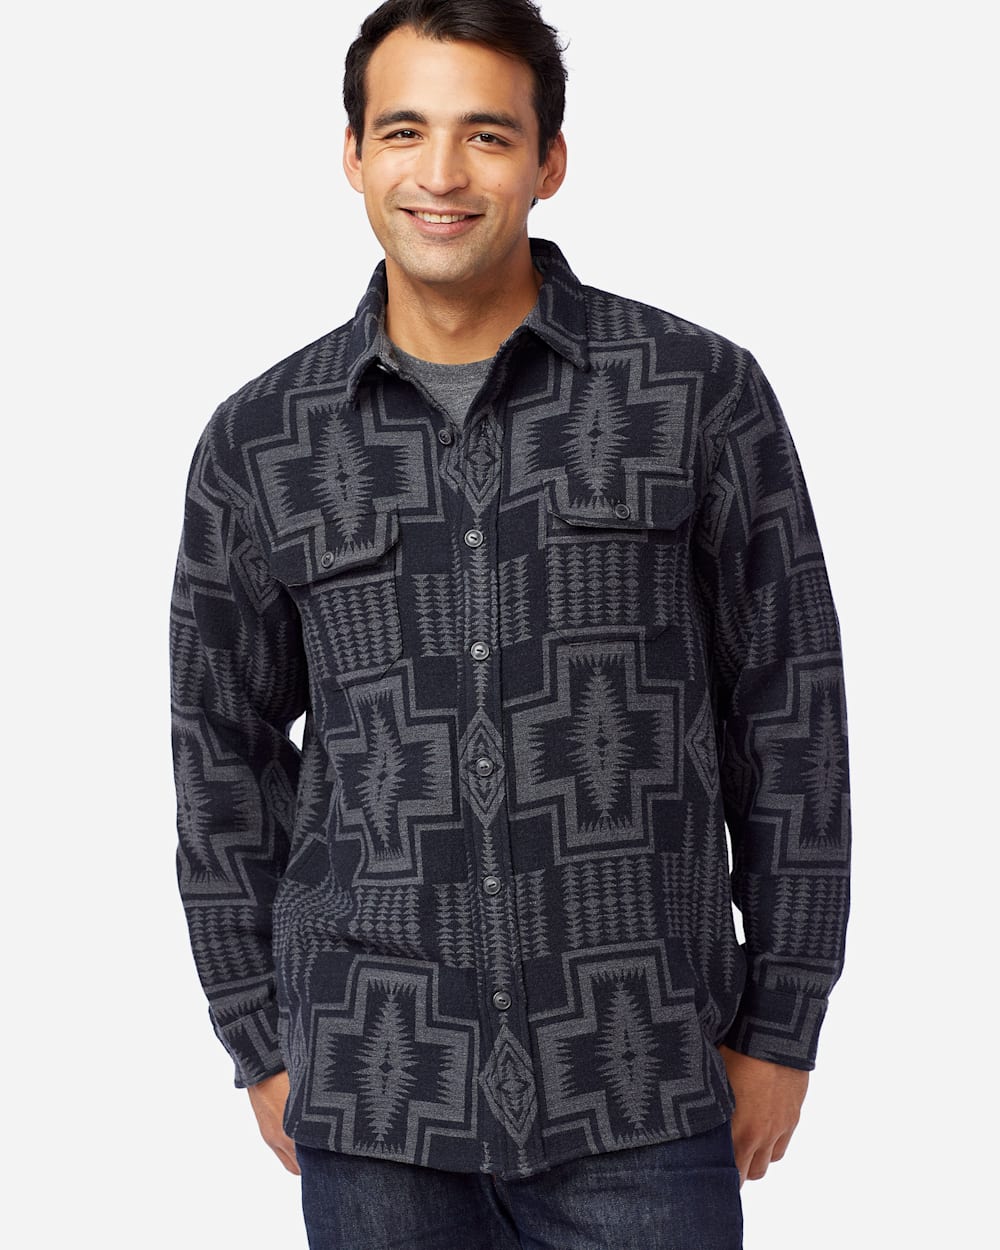 ALTERNATE VIEW OF MEN'S DOUBLESOFT FLANNEL BEACH SHIRT IN BLACK/GREY HARDING image number 4